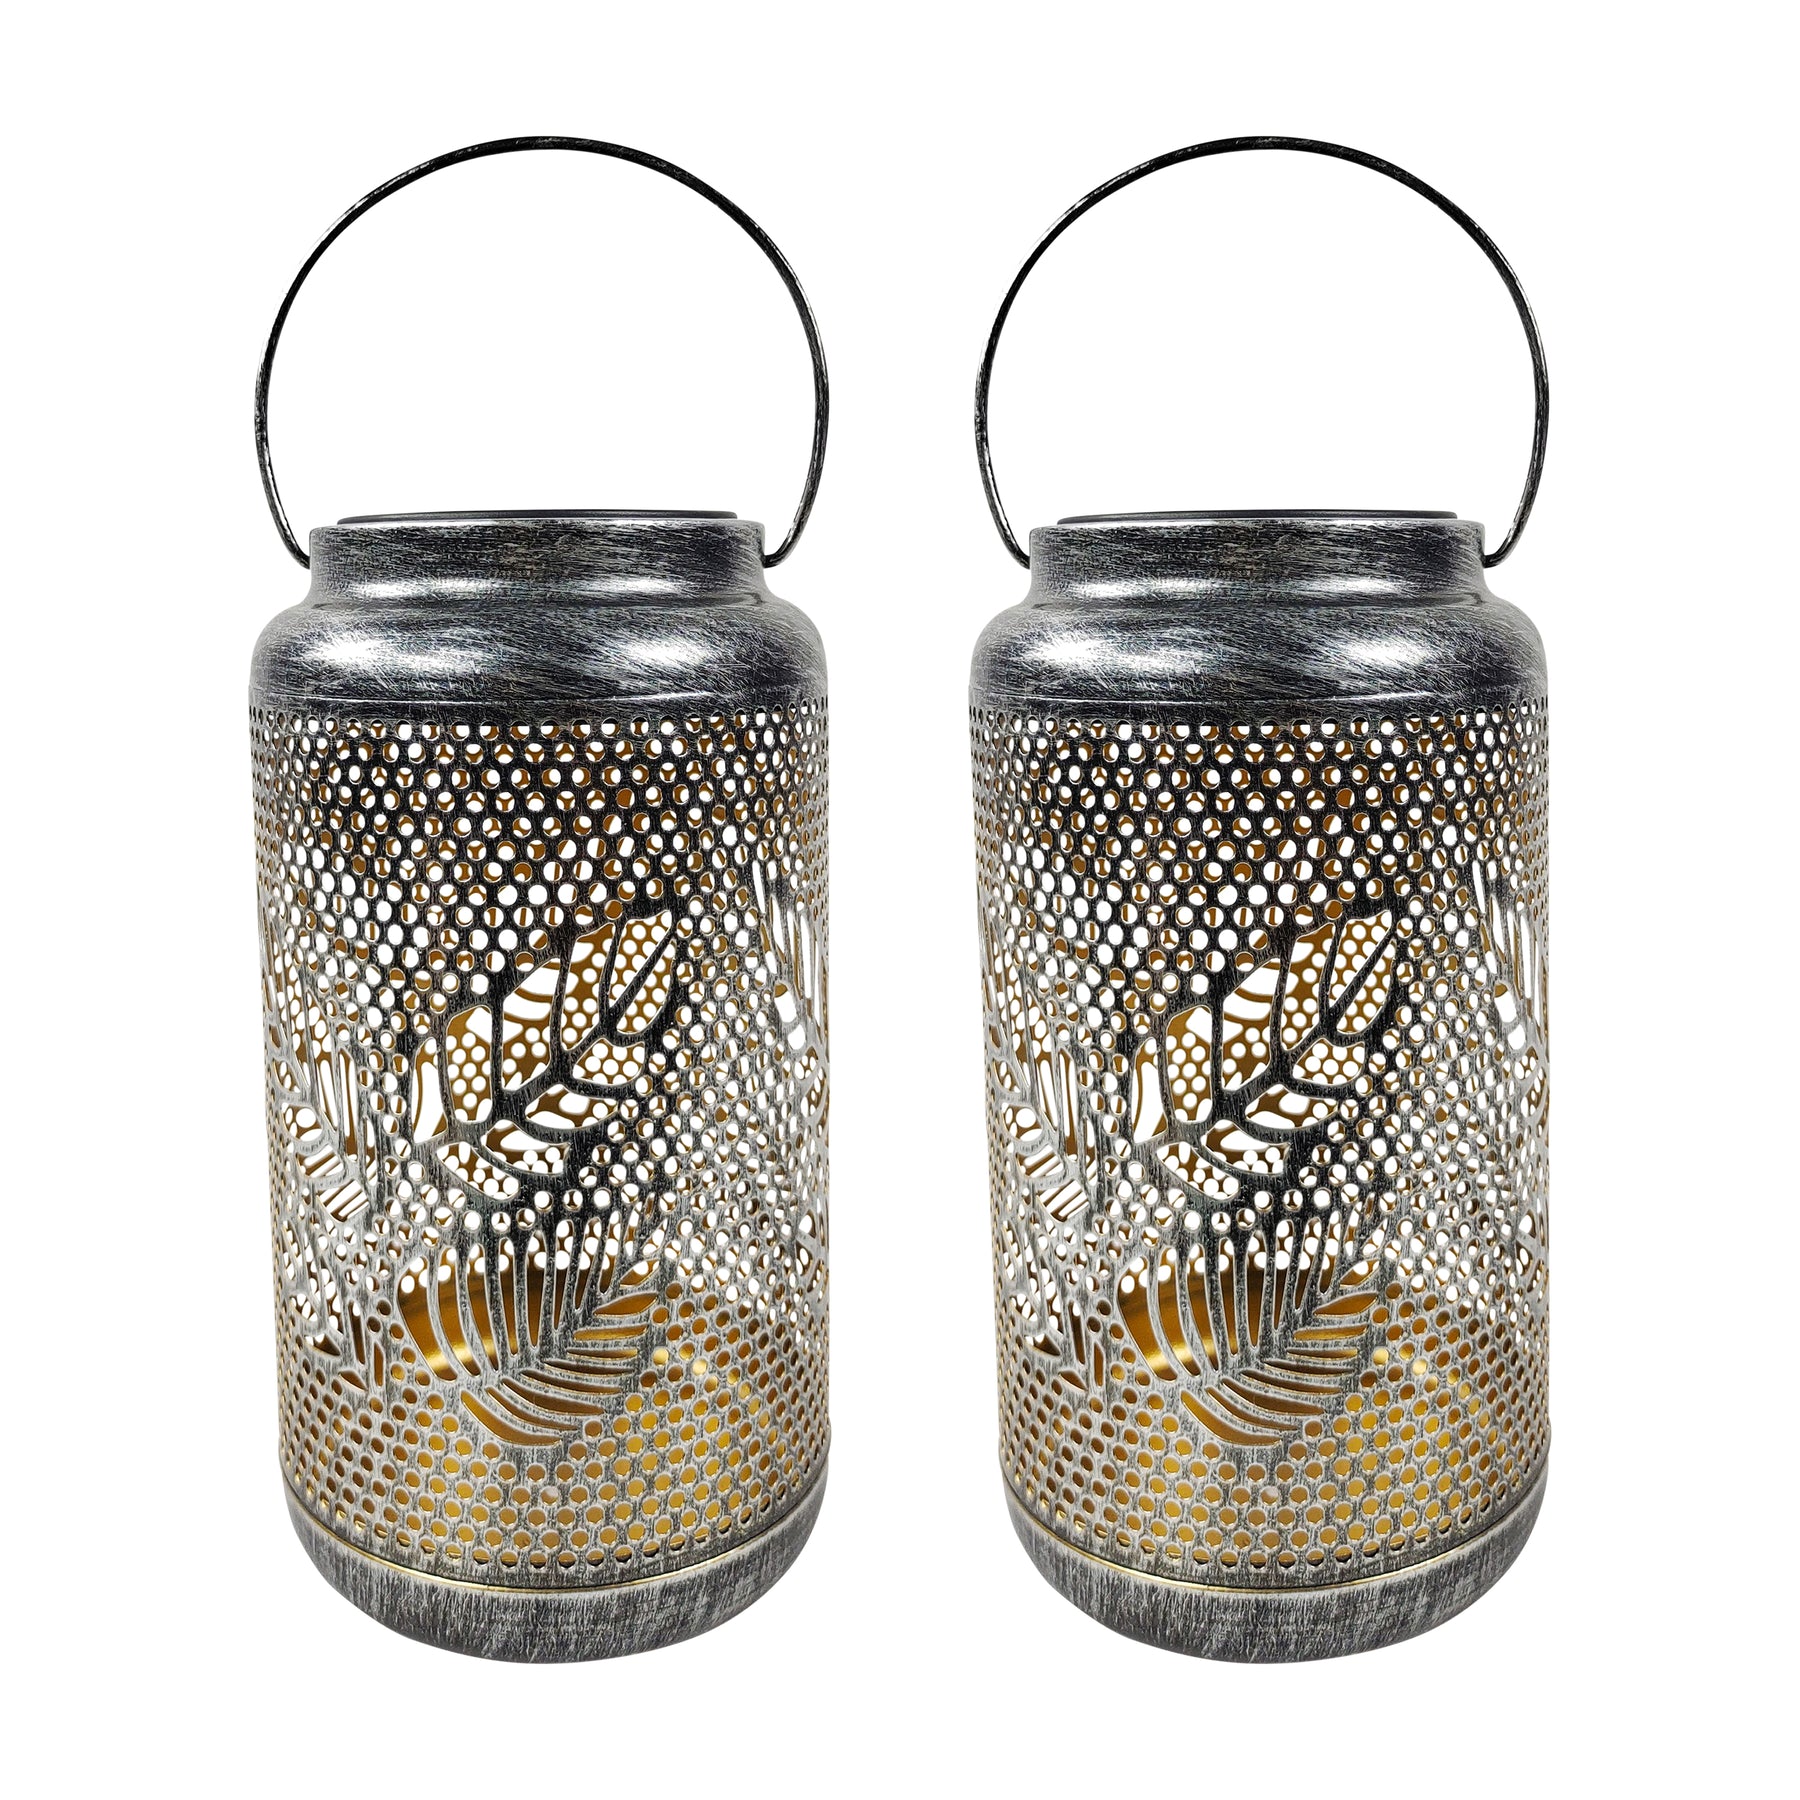 Bliss Outdoors 9-inch Tall 2-Pack Hanging and Tabletop Decorative Solar LED Lantern with Unique Berry Leaf Design and Antique Hand Painted Finish in the Brushed Silver Variation.